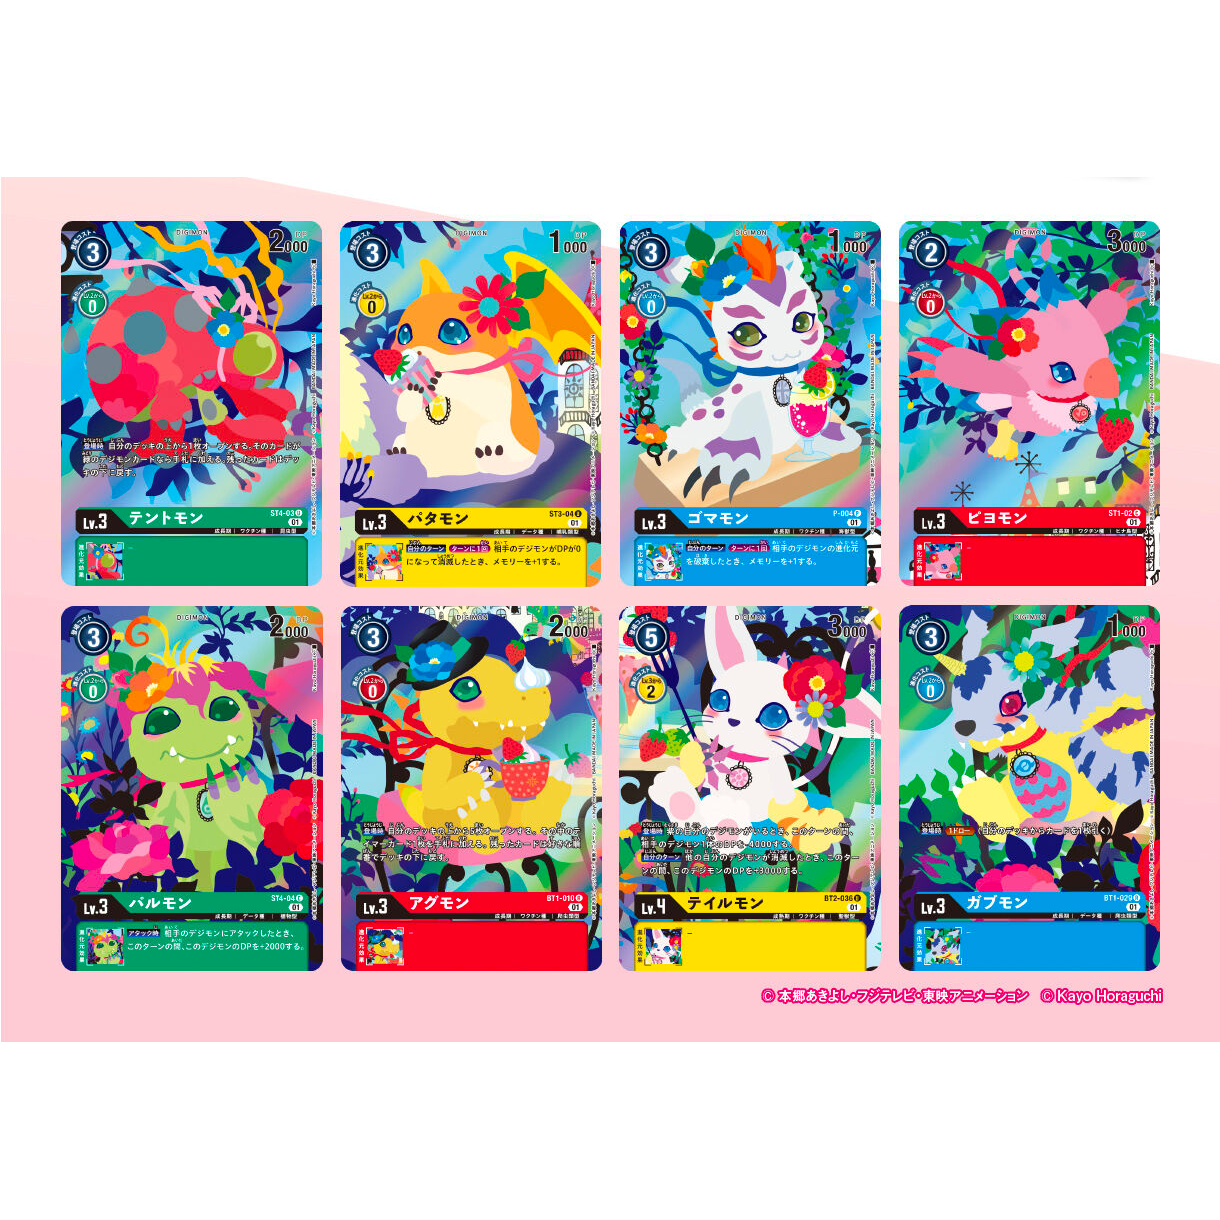 DIGIMON CARD GAME MEMORIAL COLLECTION 01  Release date: 2021